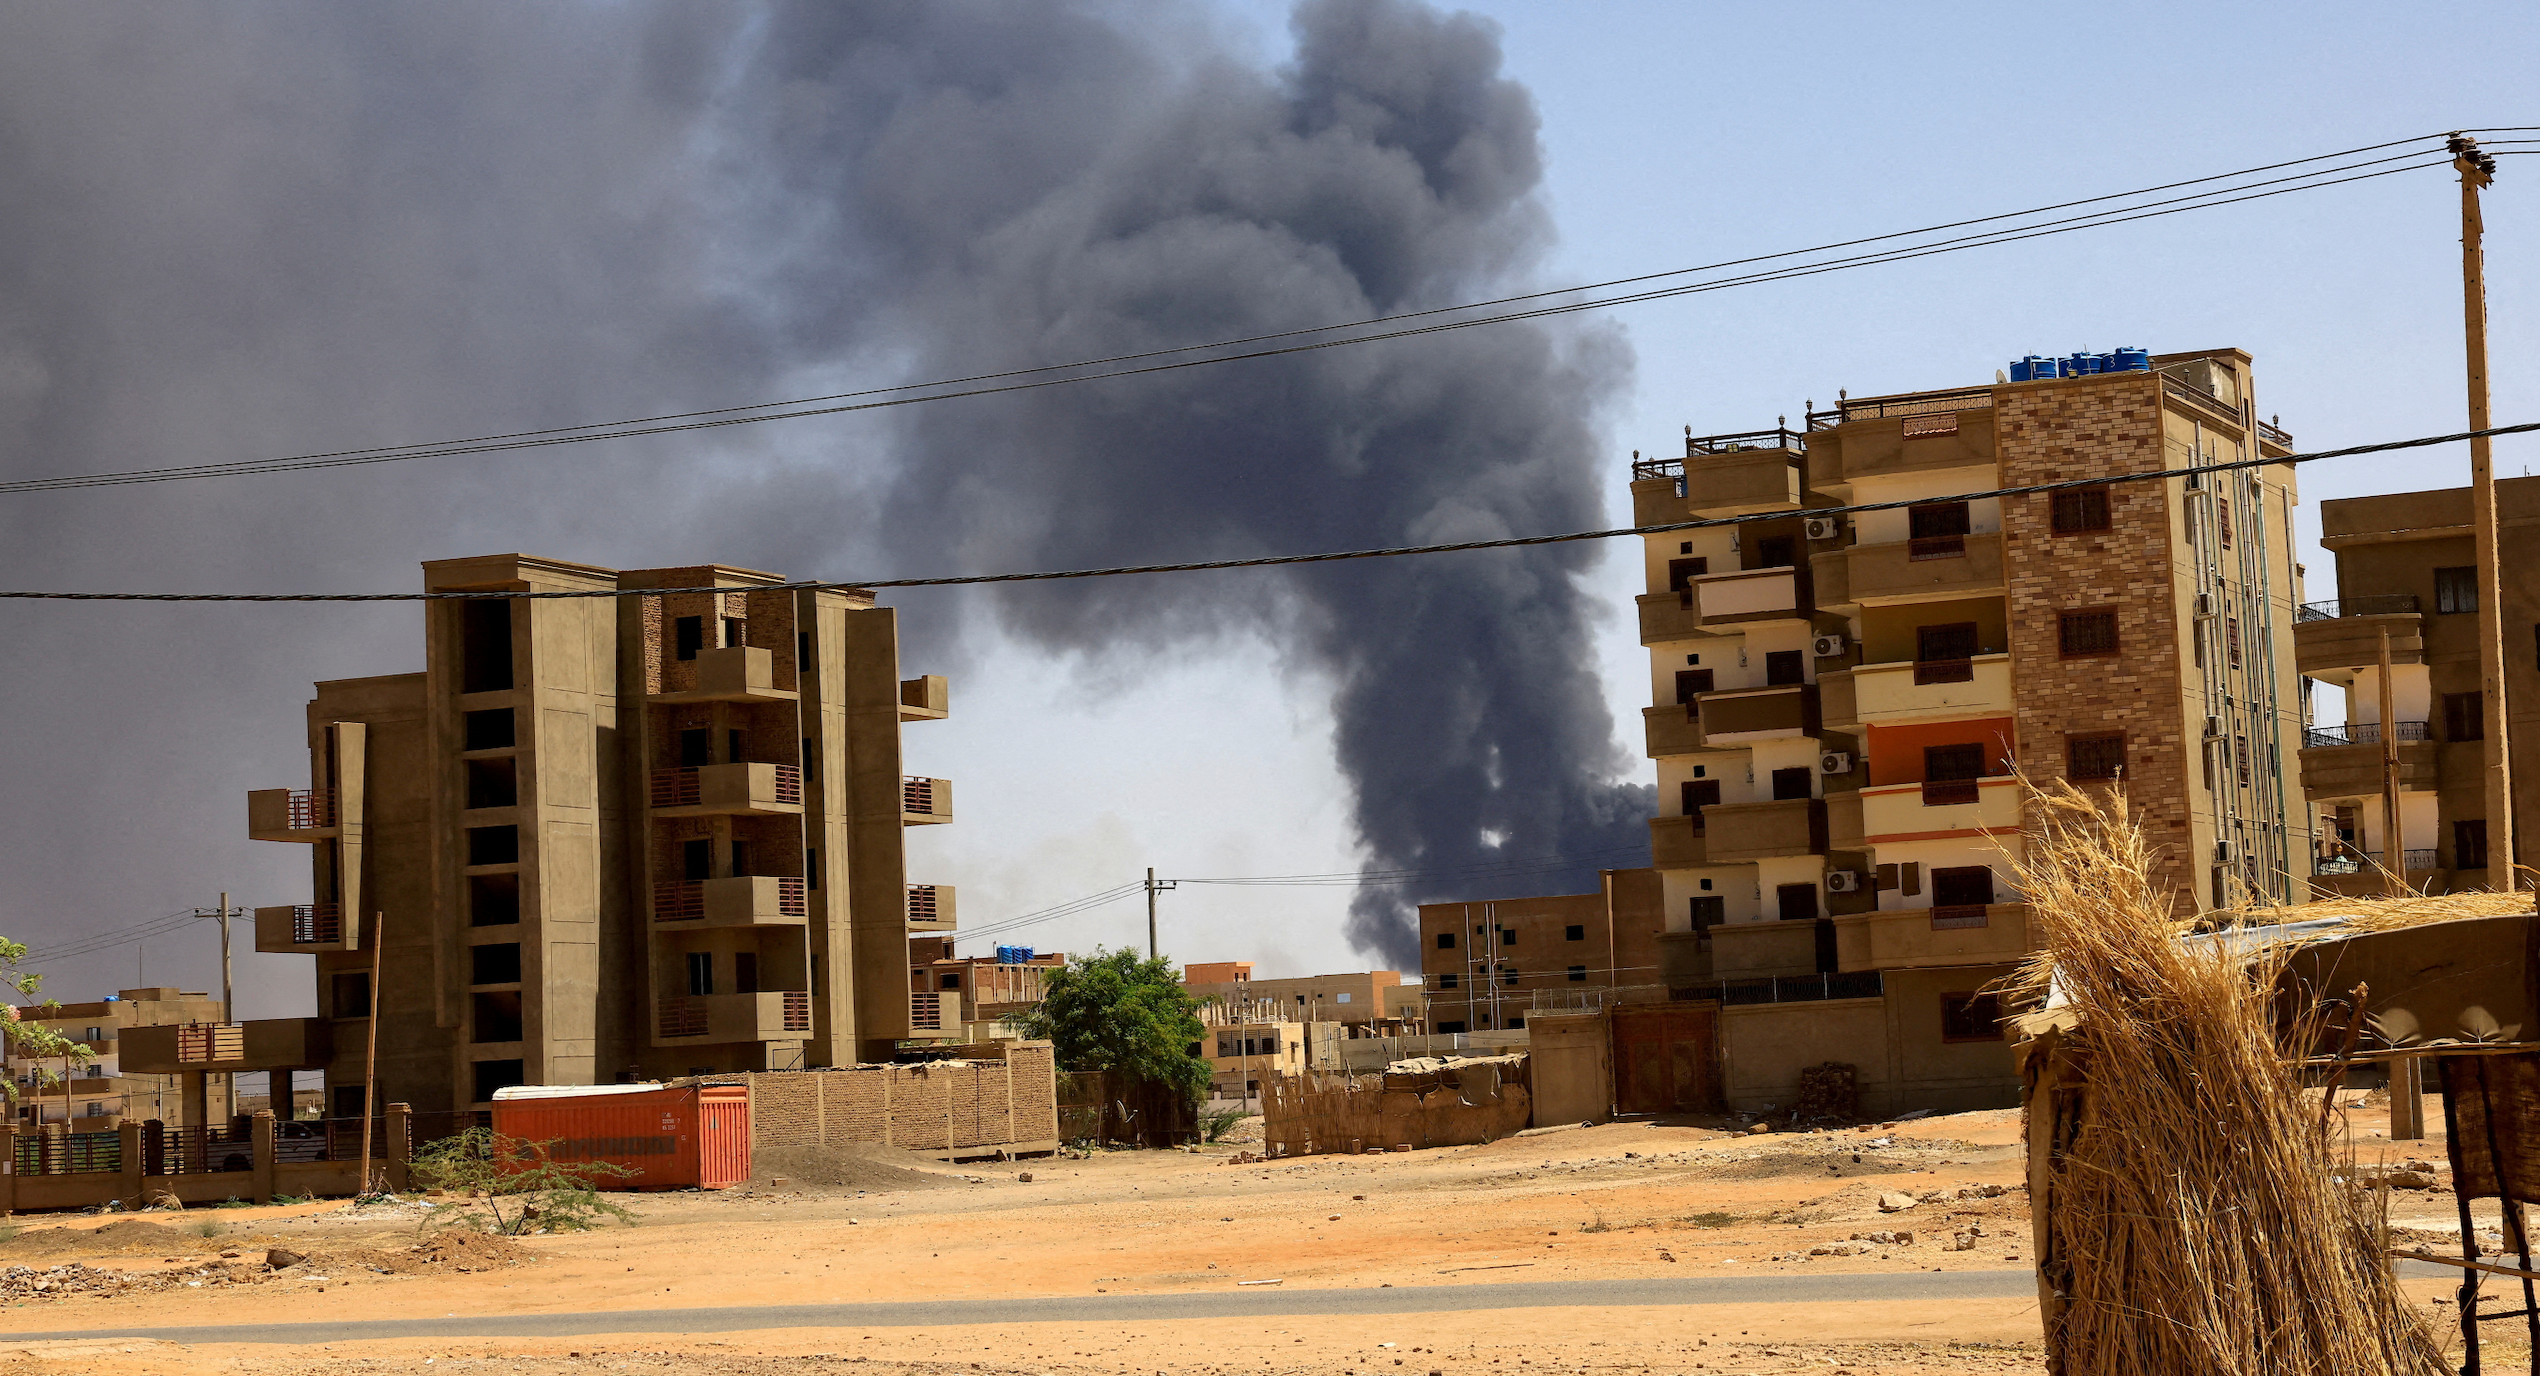 Smoke rises above buildings after an aerial bombardment, during clashes between the paramilitary Rapid Support Forces and the army in Khartoum North, Sudan